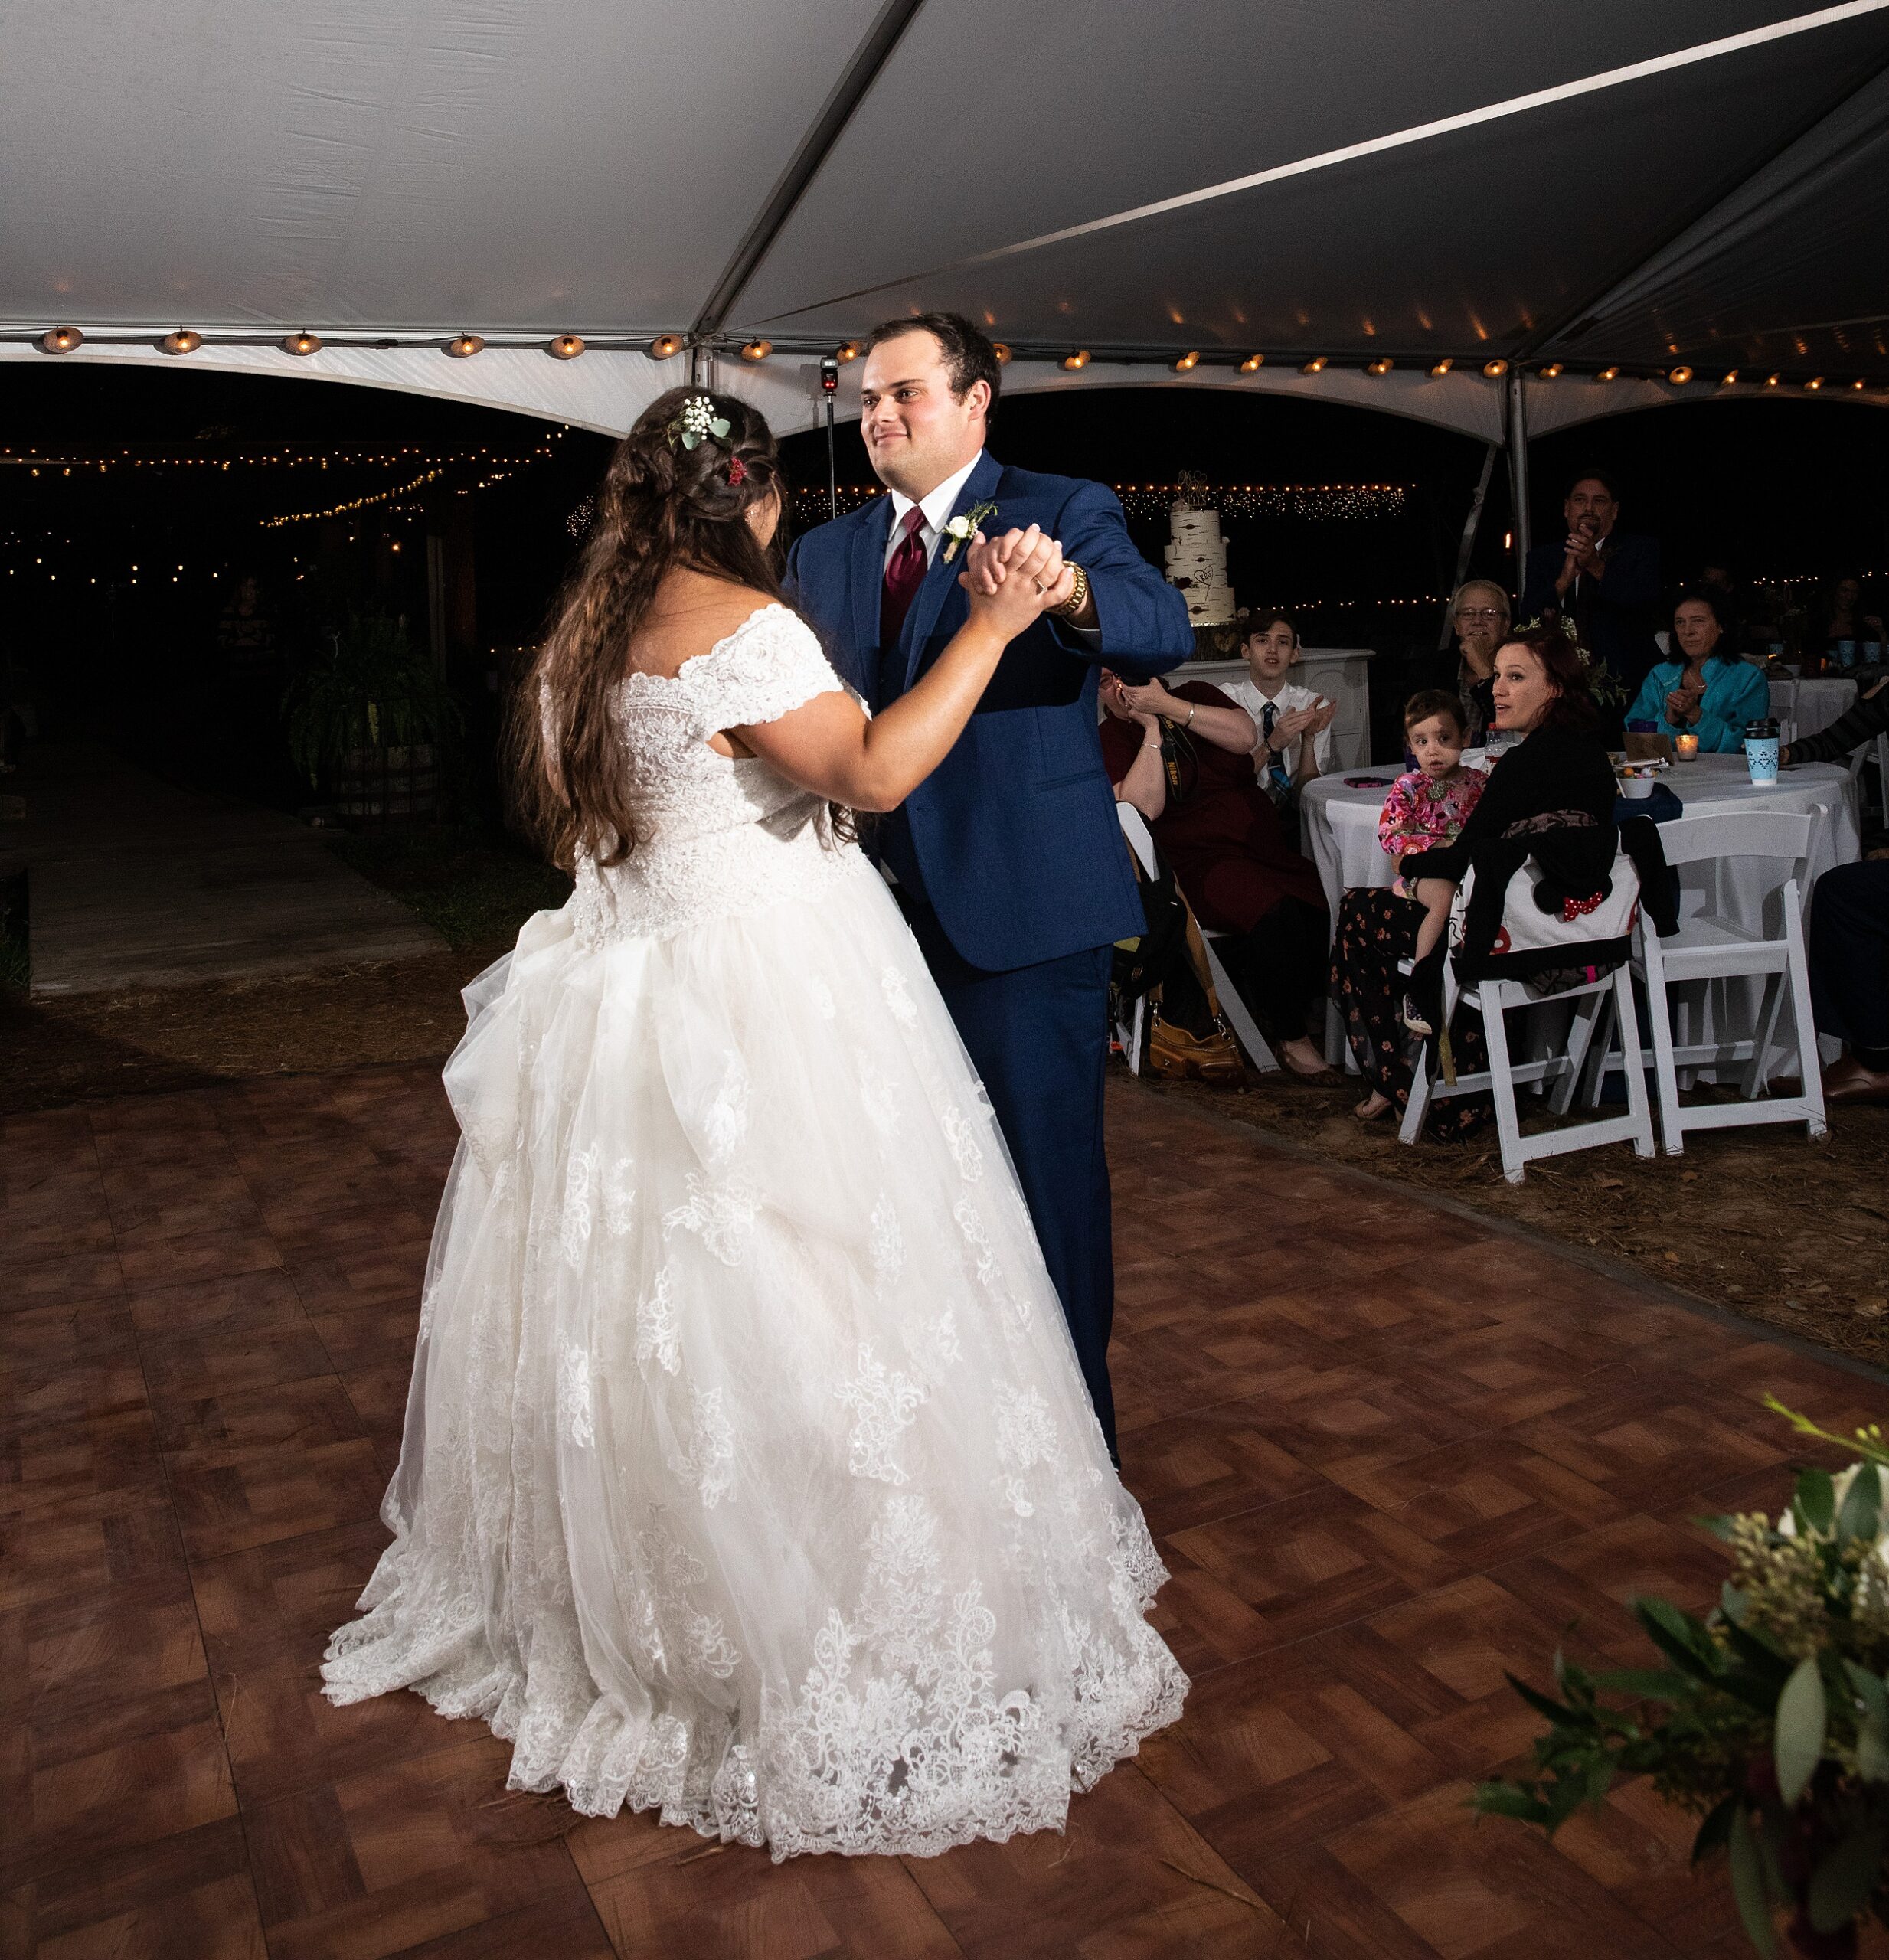 Newlyweds dance under a large white tent with guests watching